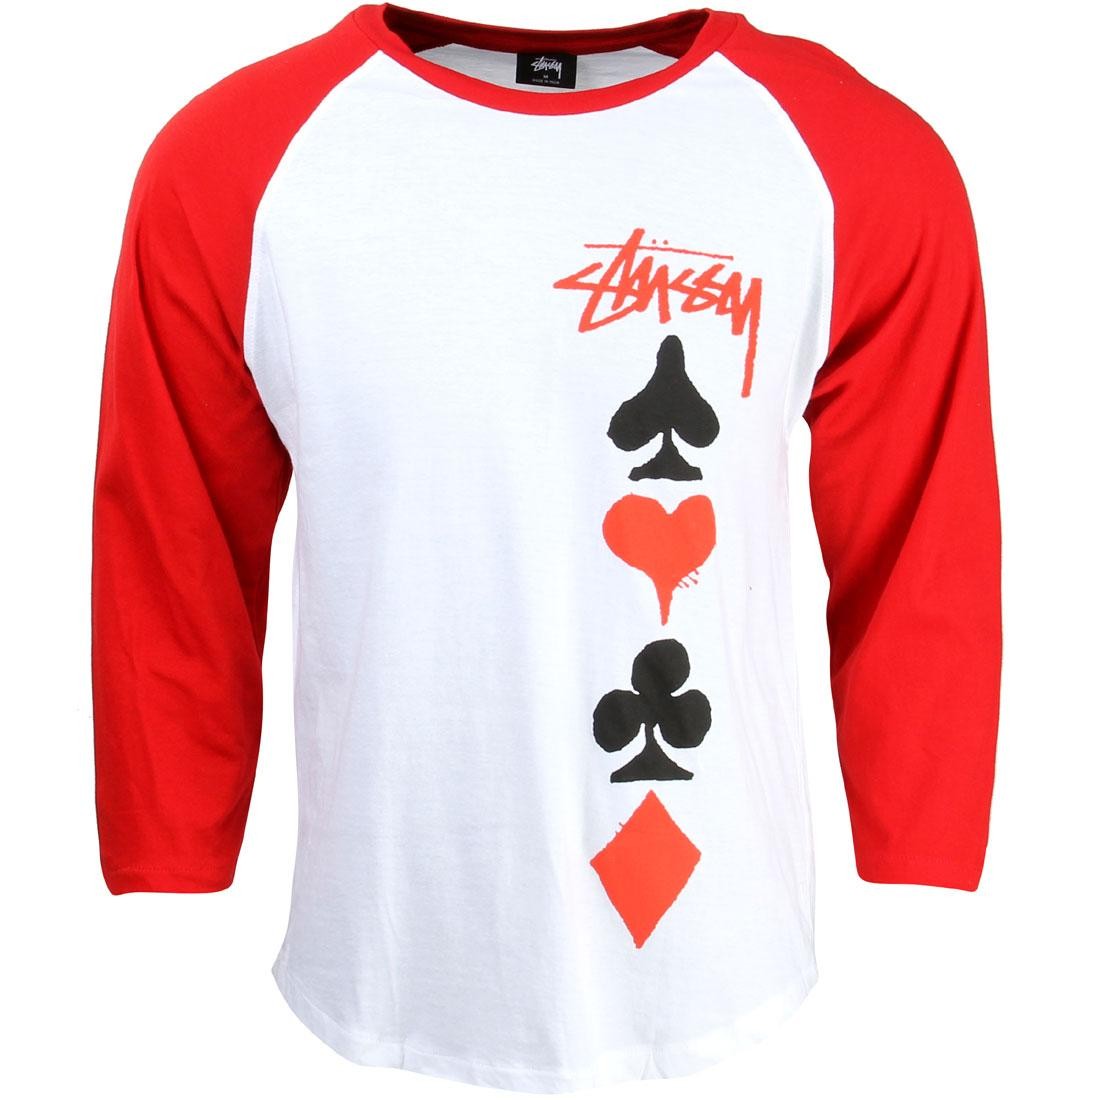 red and white raglan